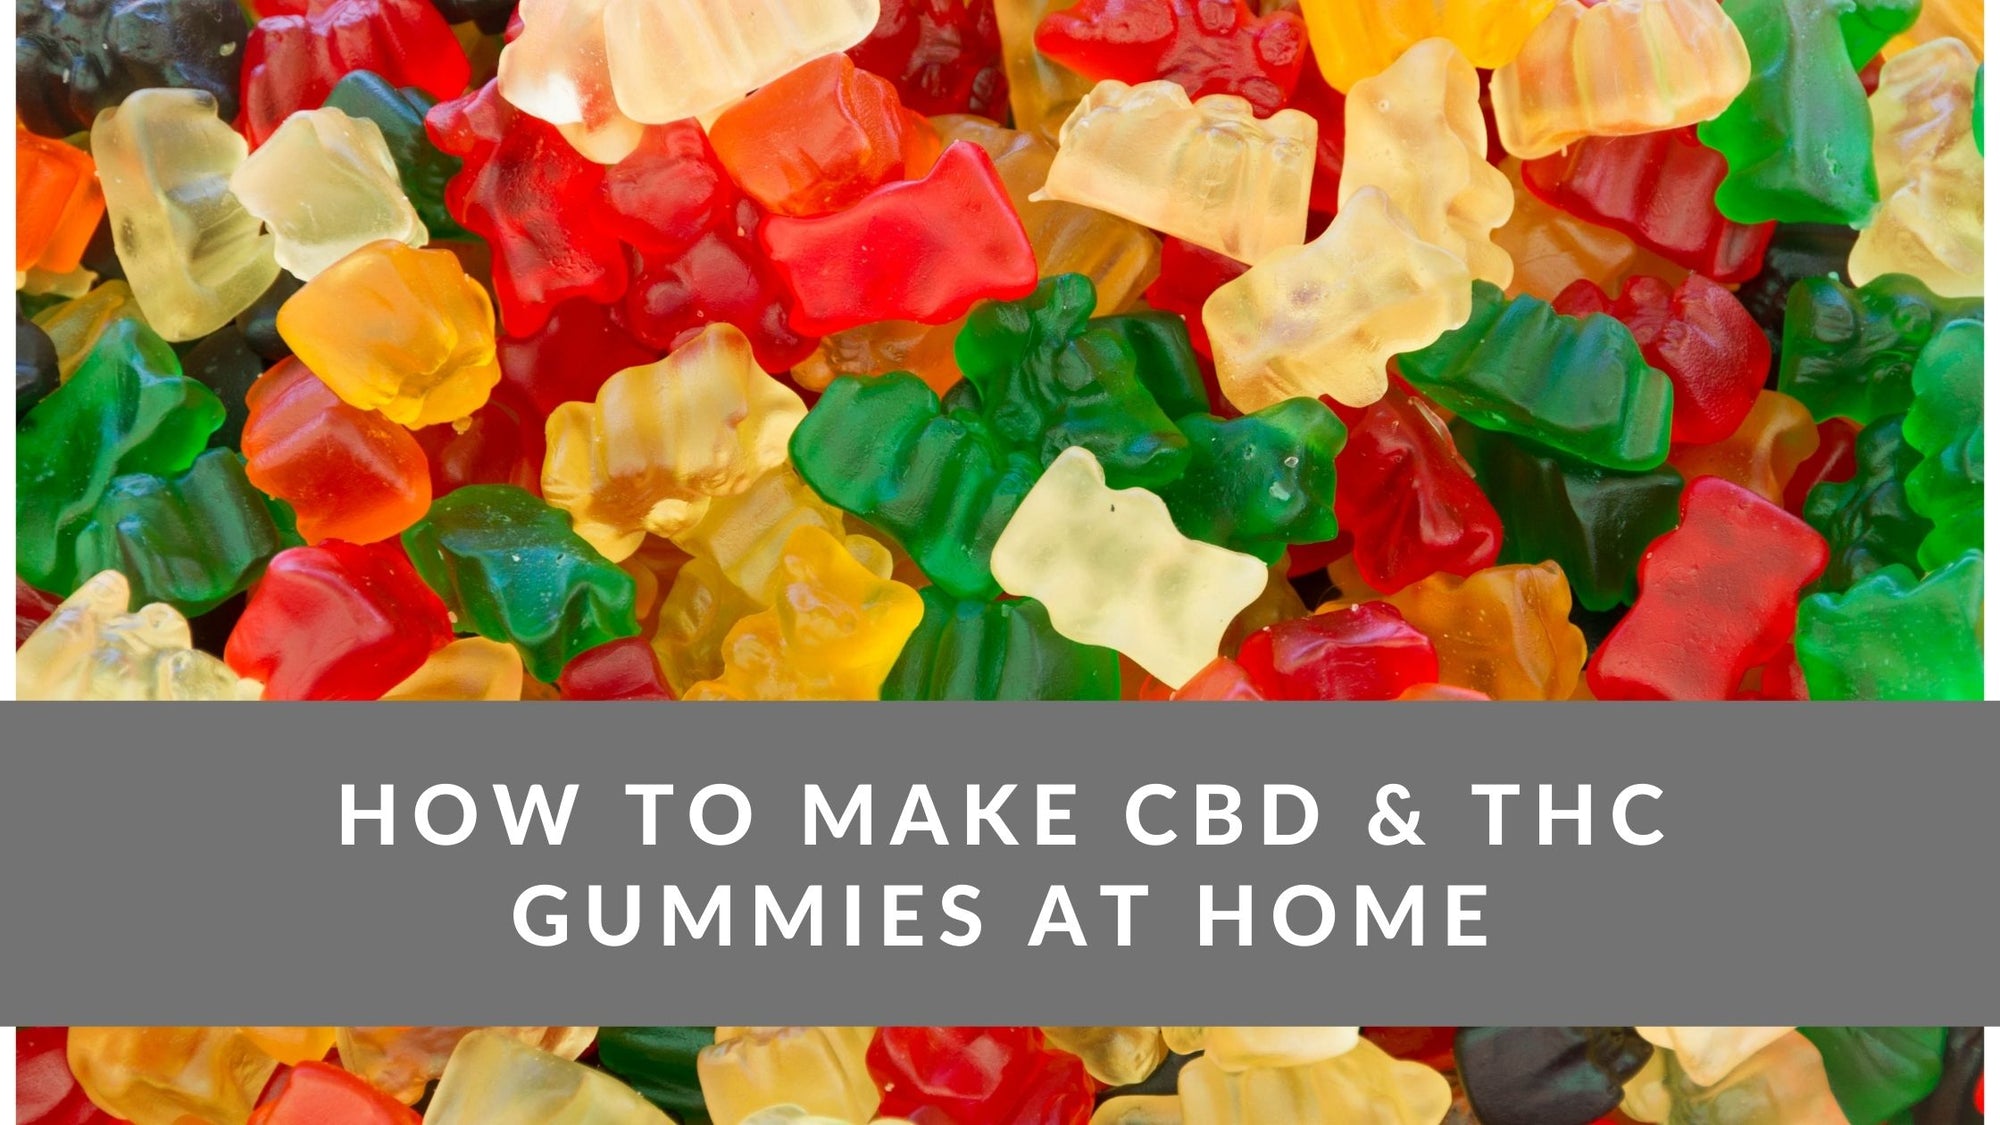 How to Make CBD or THC Gummies at Home